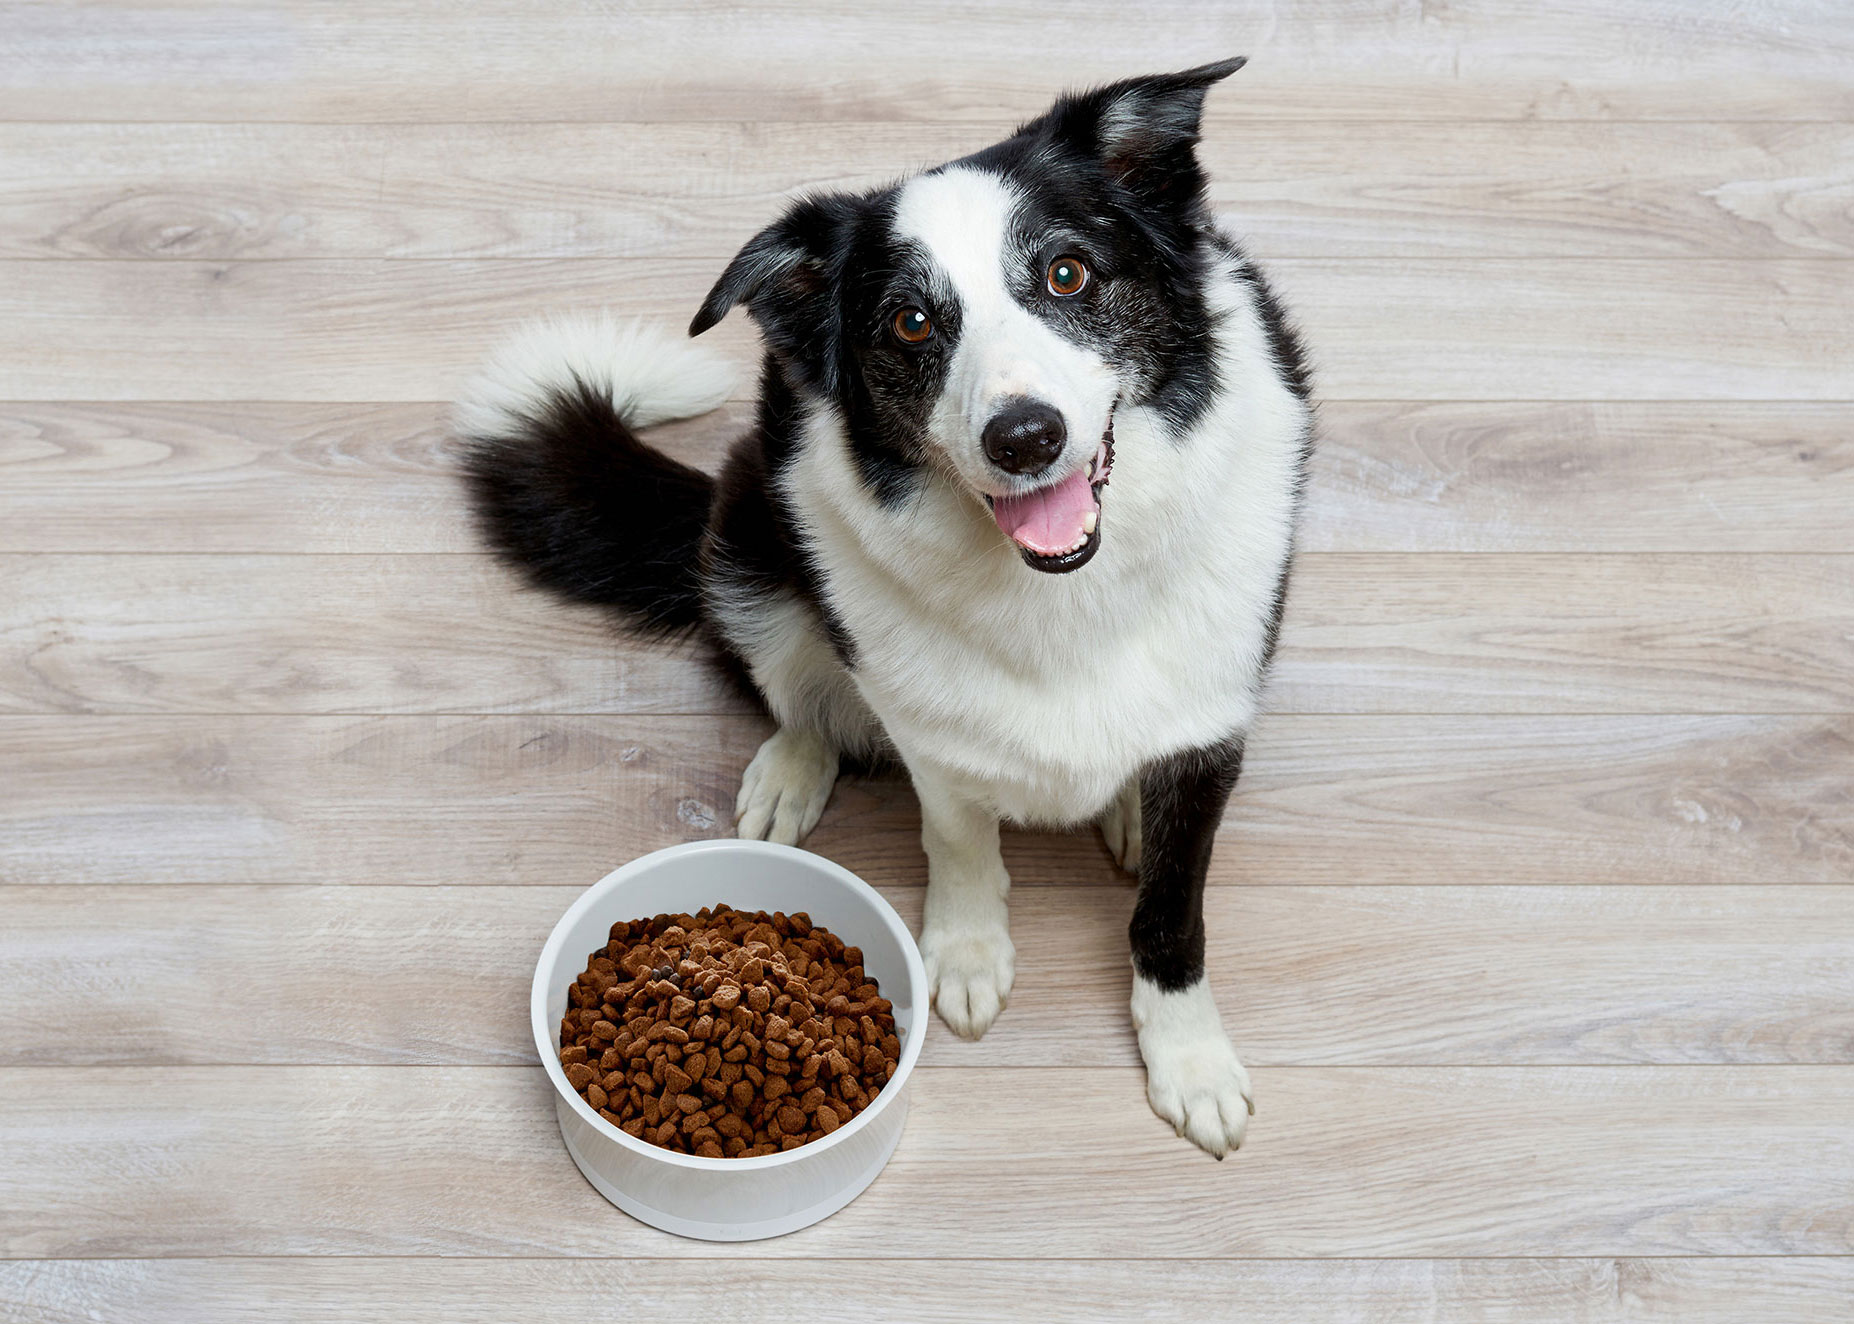 ObeDog smart dog food bowl. A commercial animal project by SF based photographer, Peter Samuels.